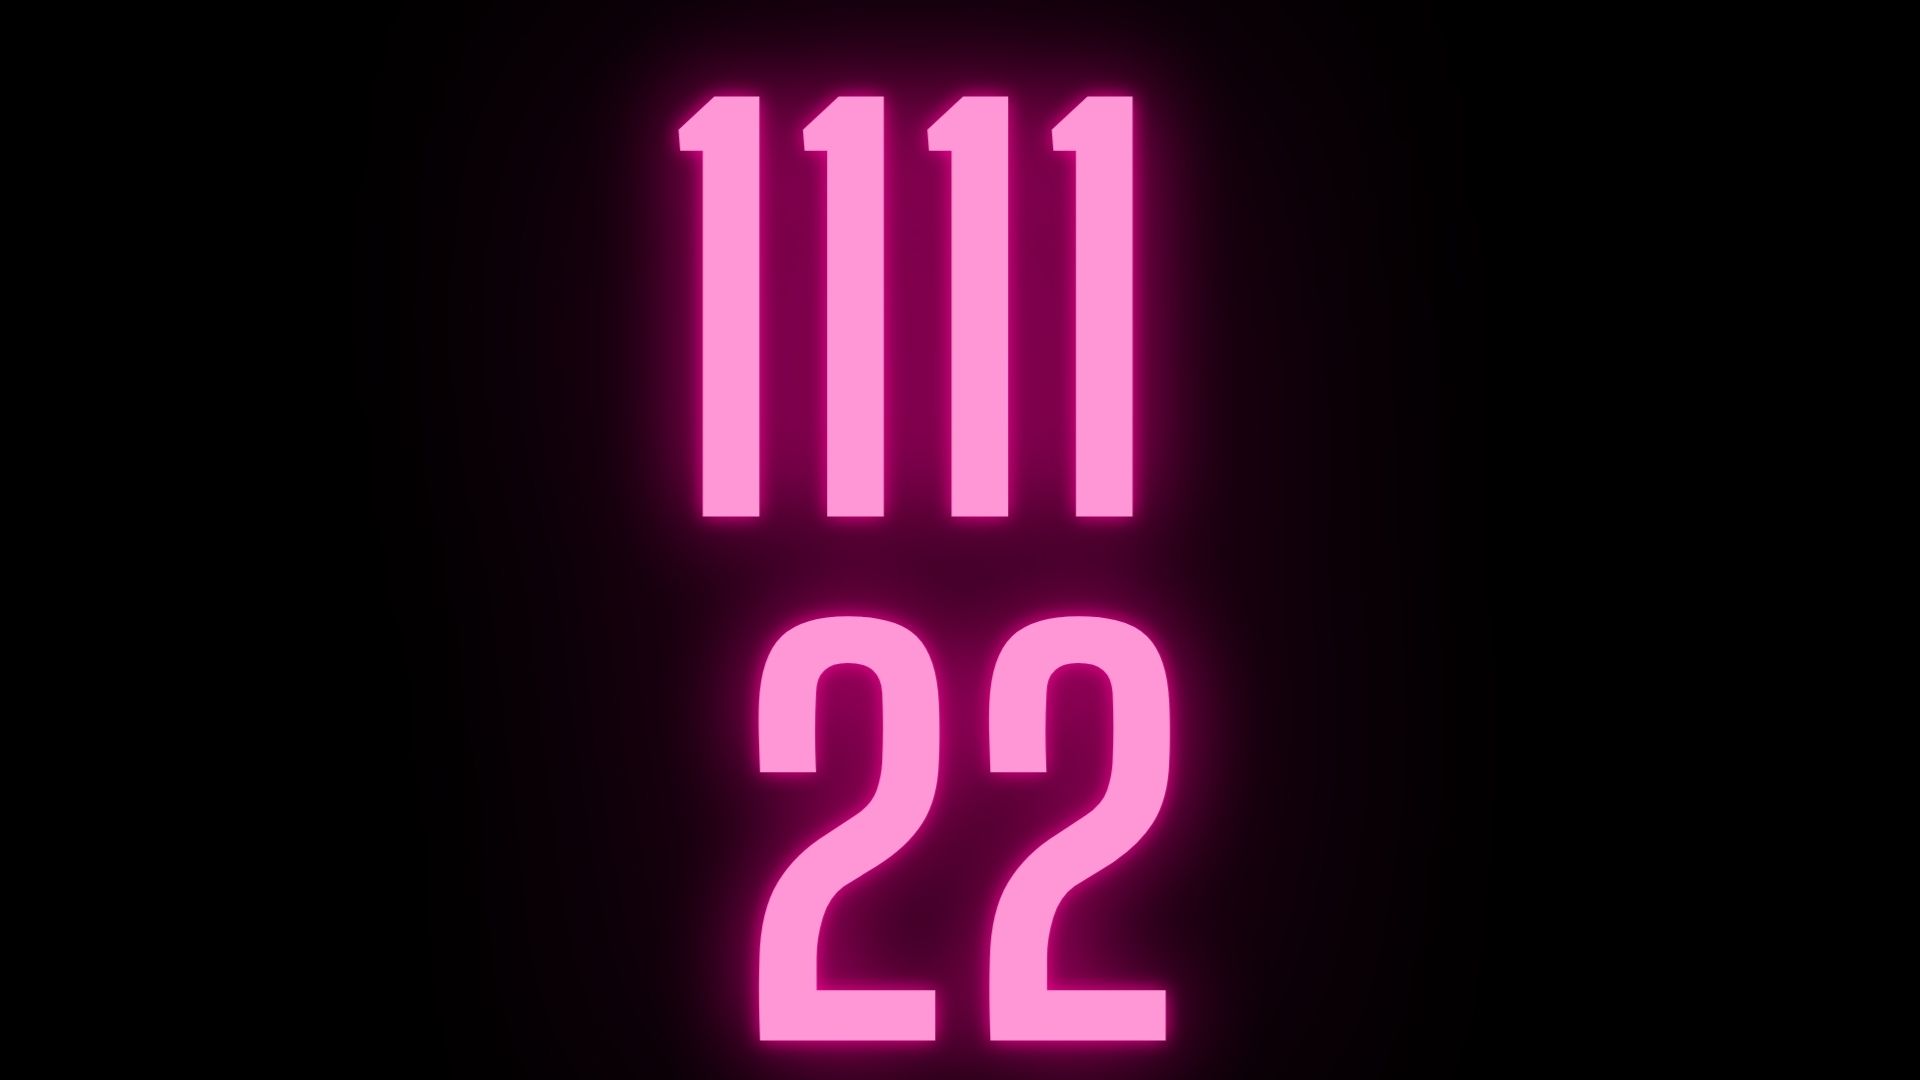 1111 22 Meaning - Exploring The Significance Of This Numeric Sequence